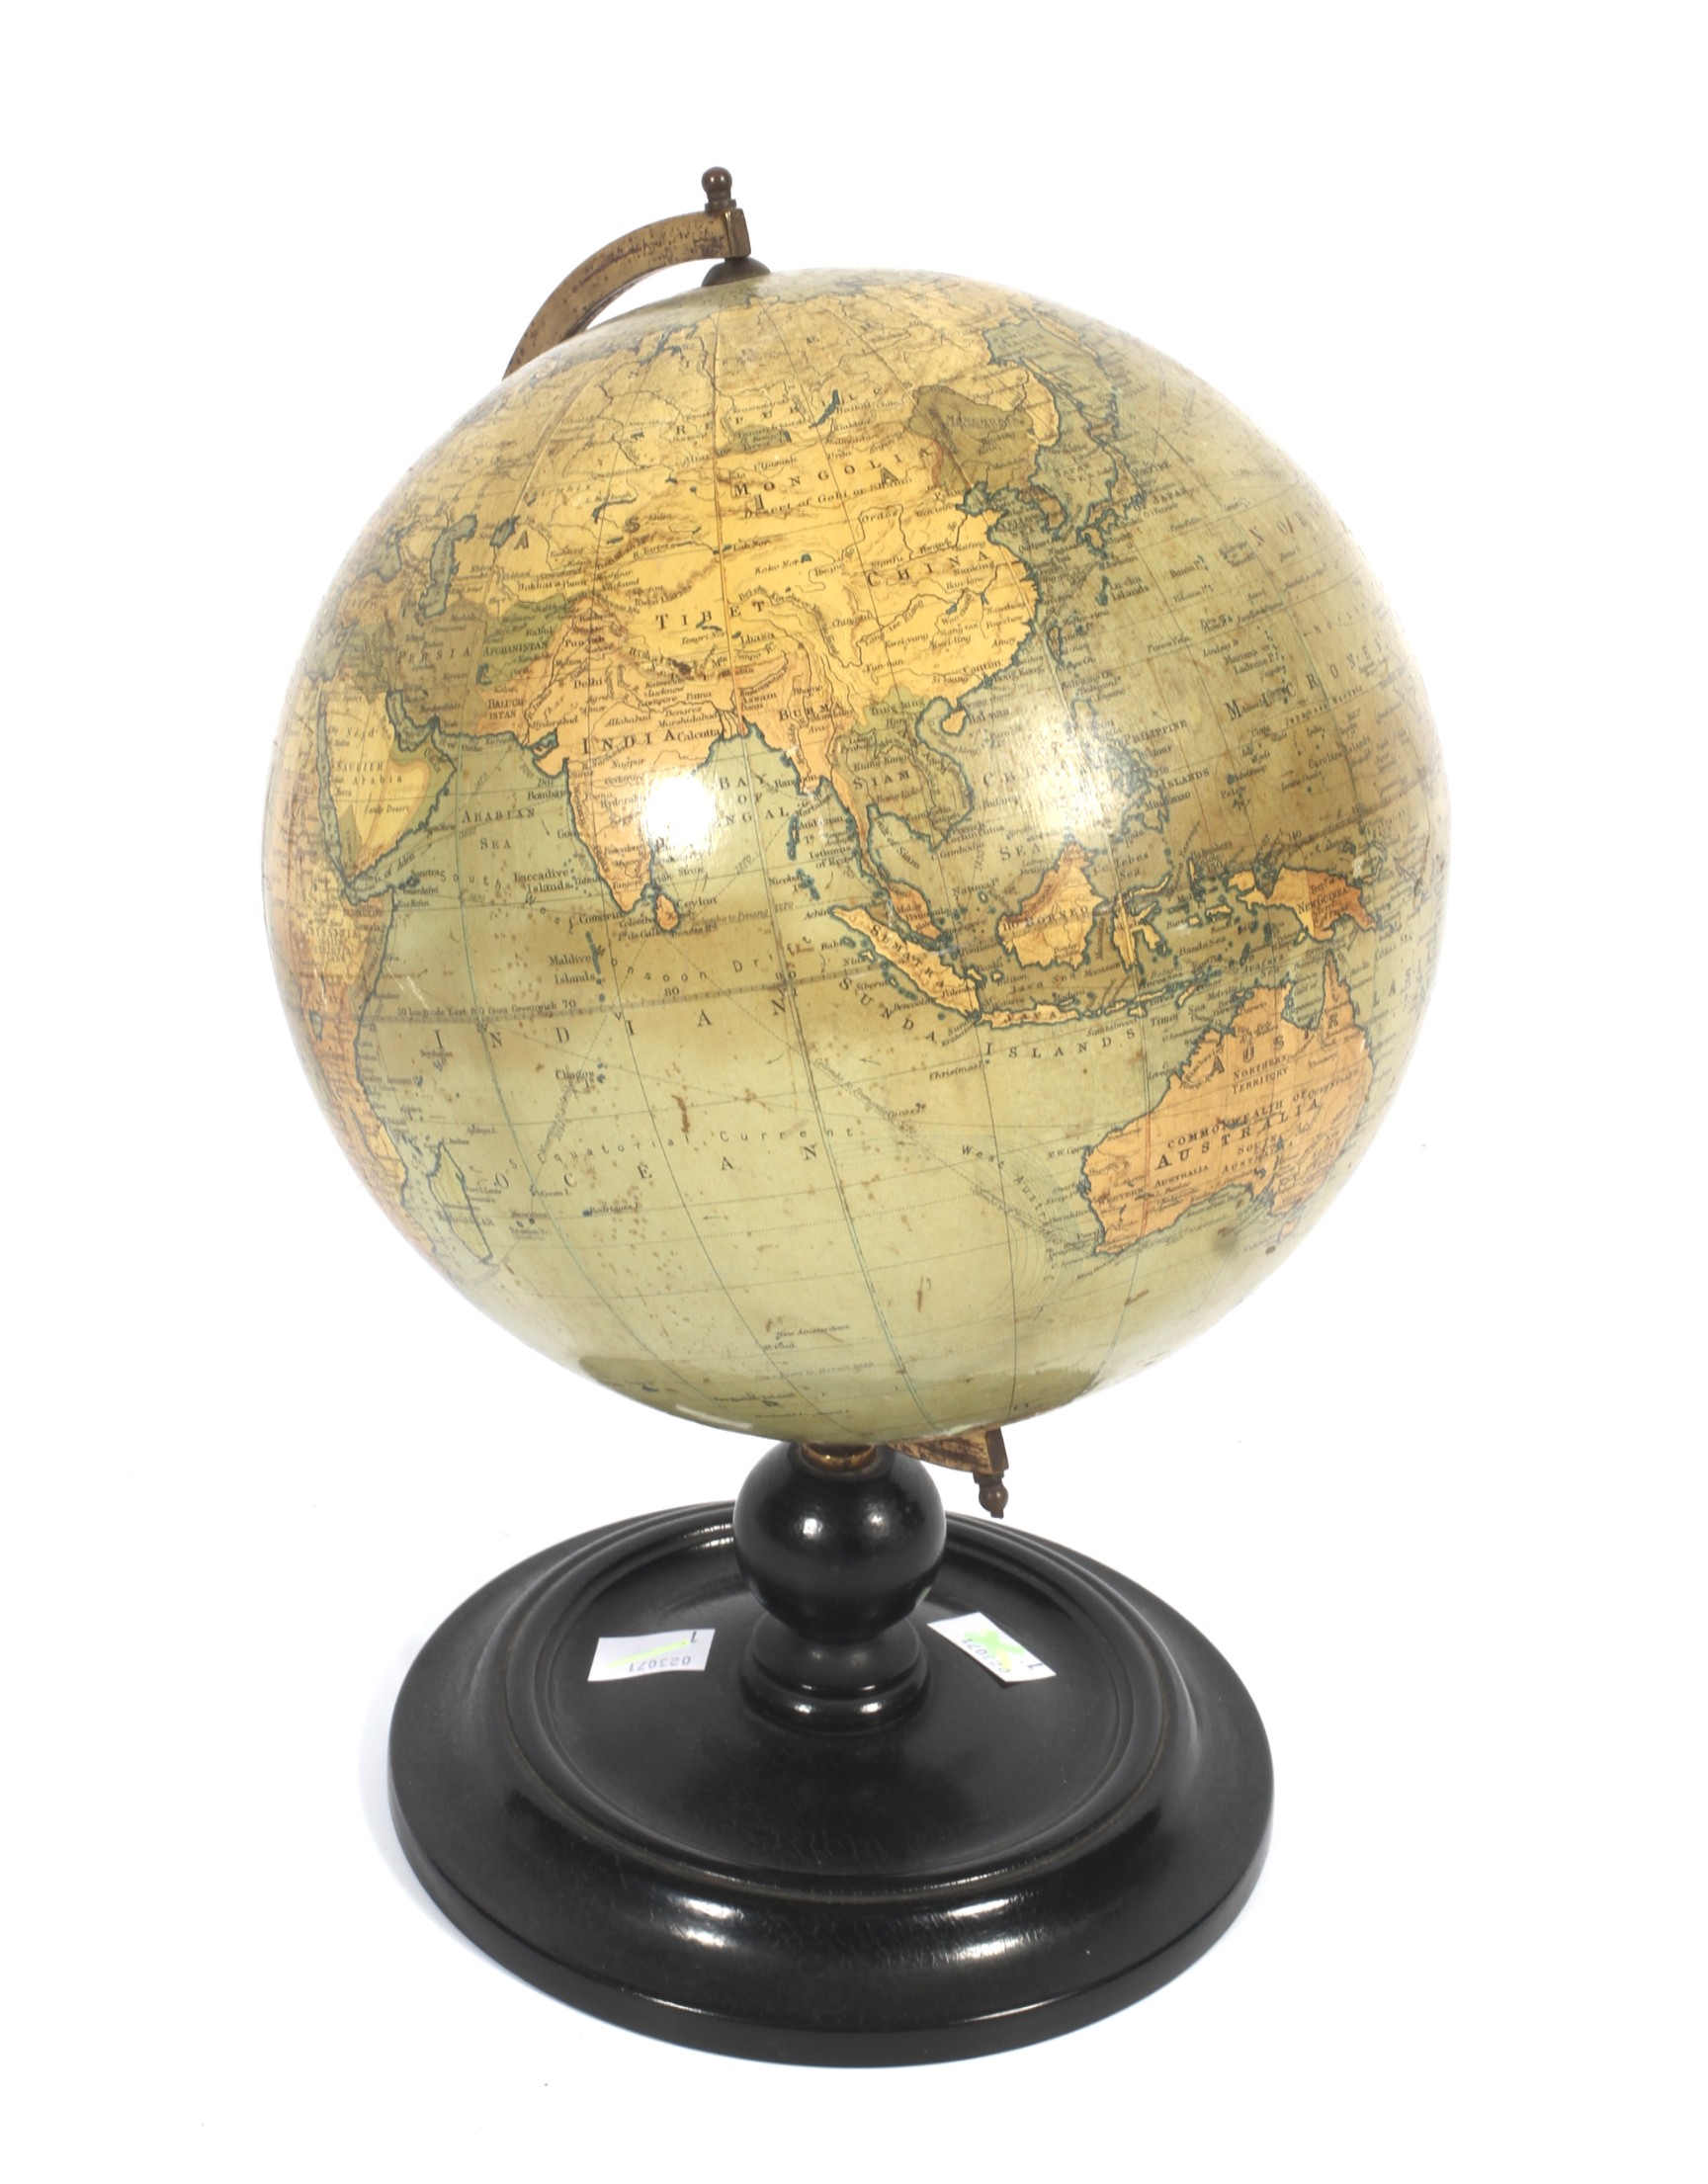 An early 20th century Philip's 9 inch terrestrial globe on ebonised stand.